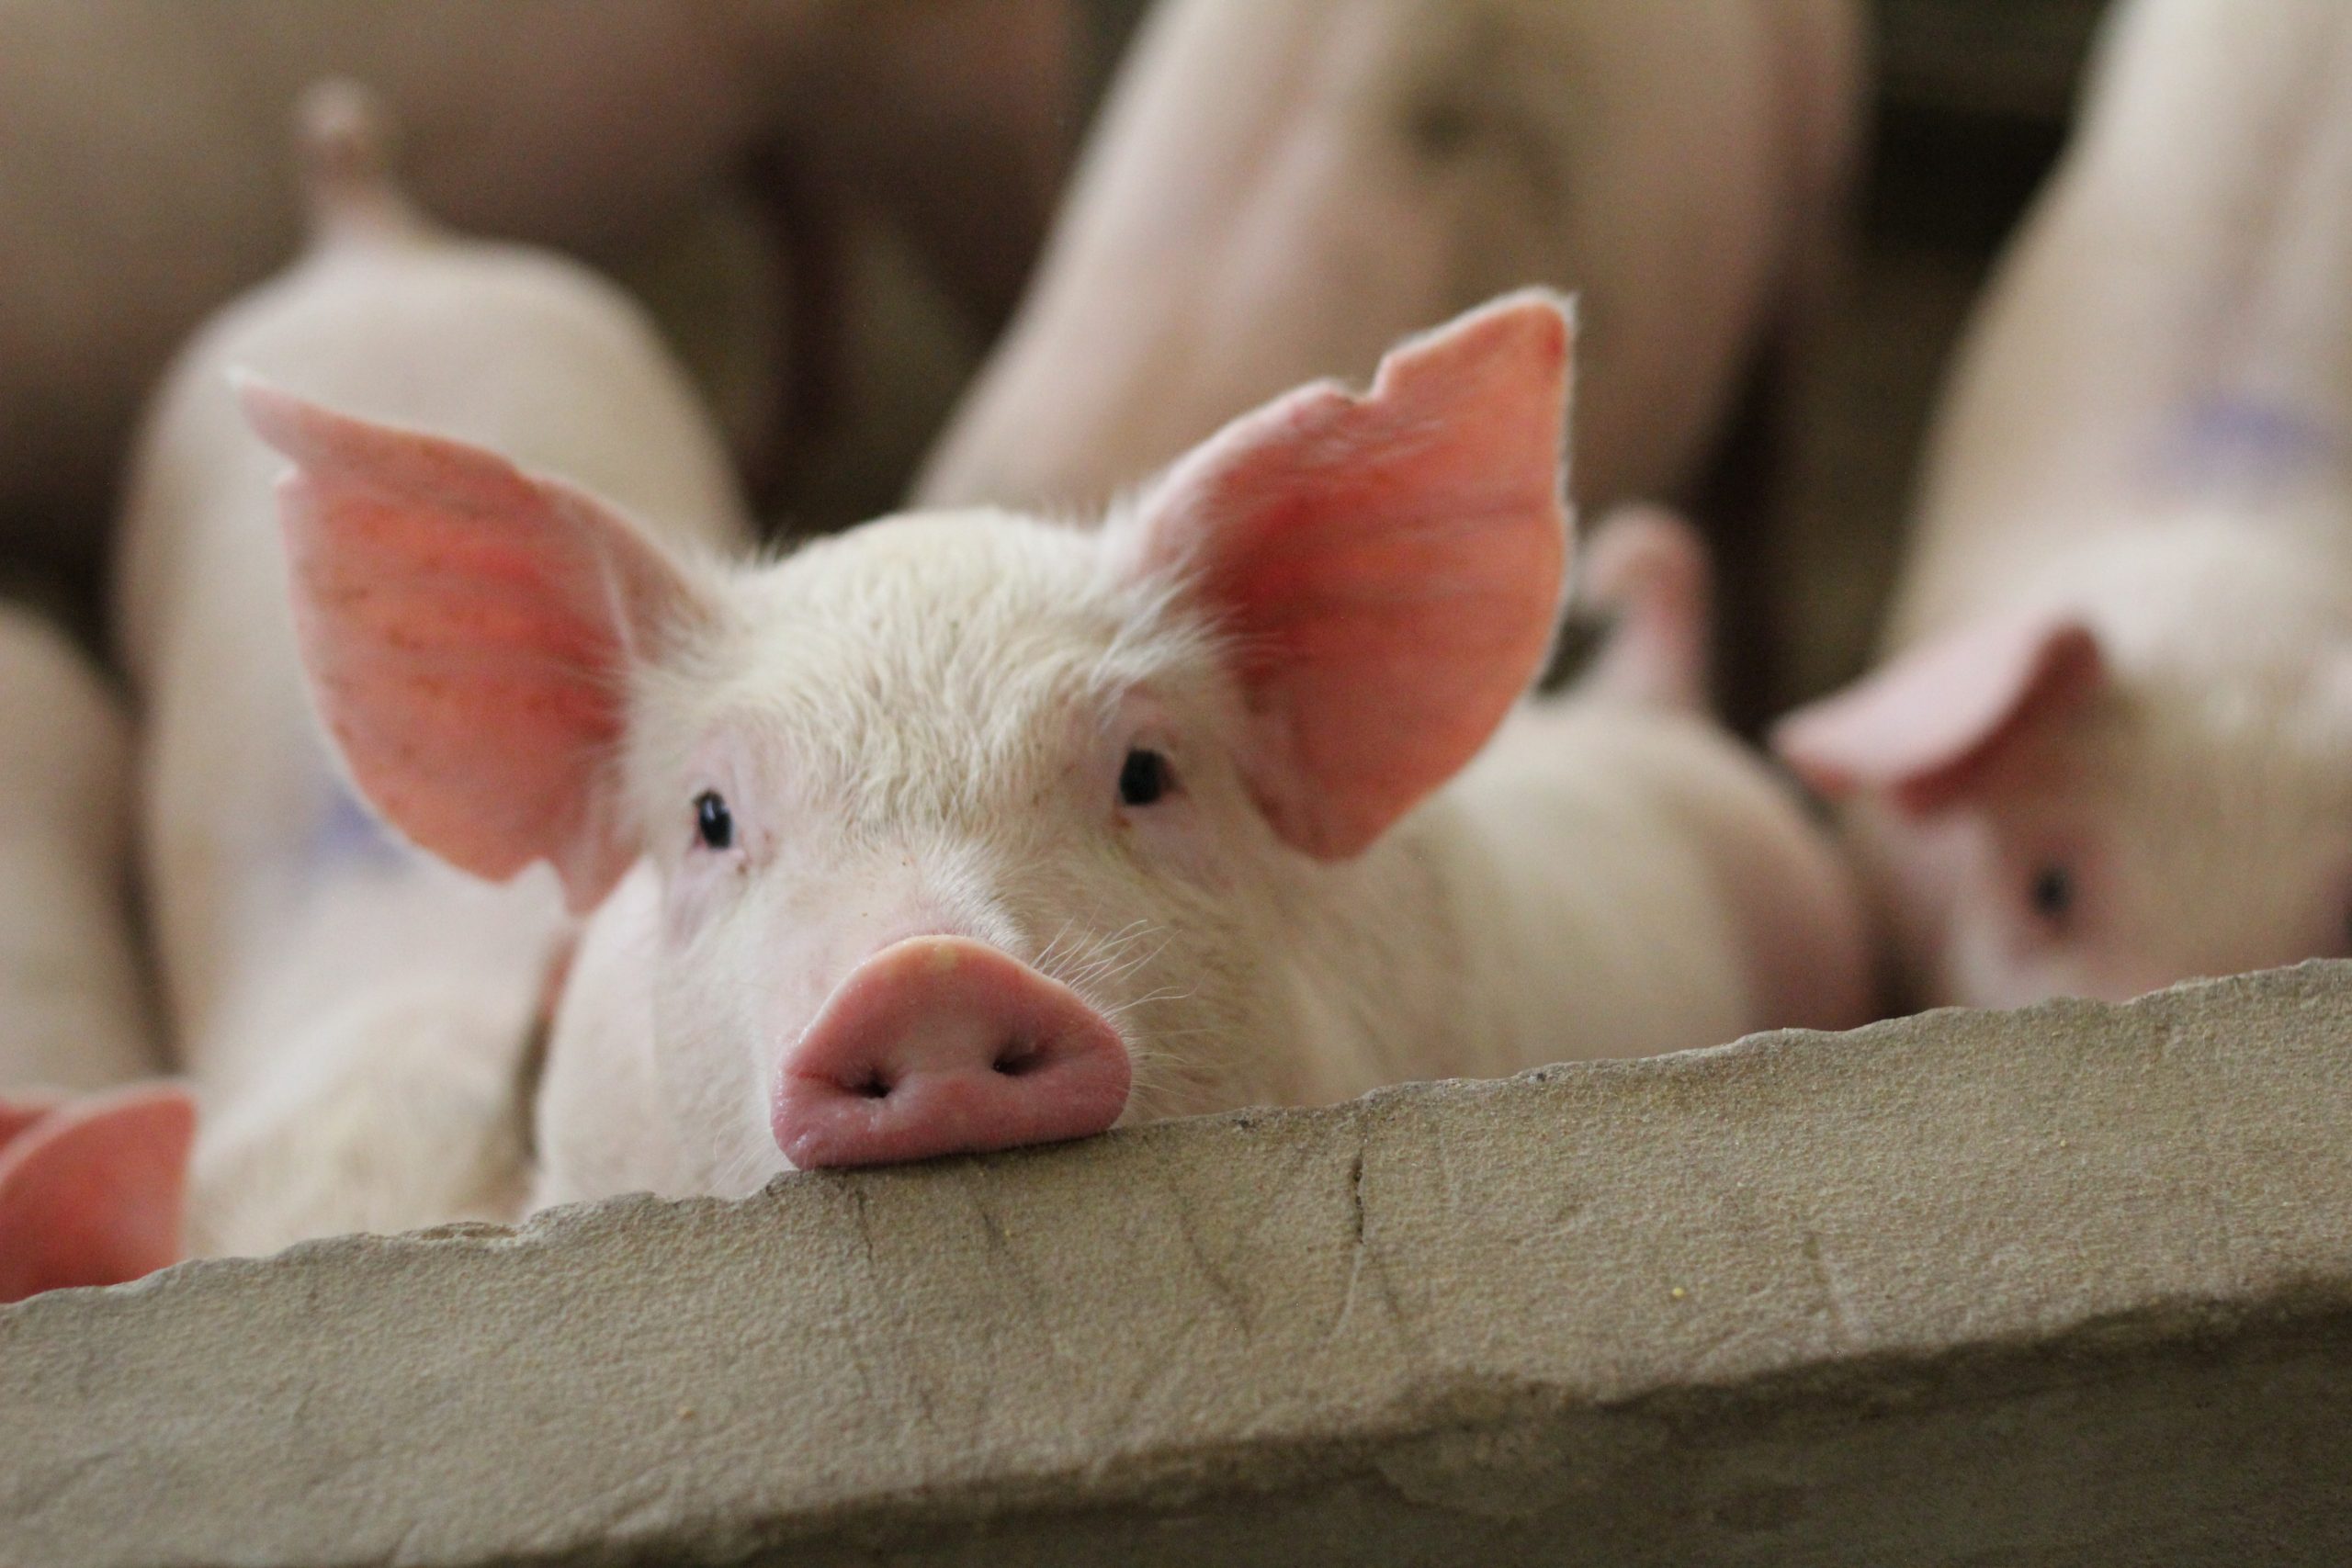 Pig sector to receive £2.2m COVID-19 support package